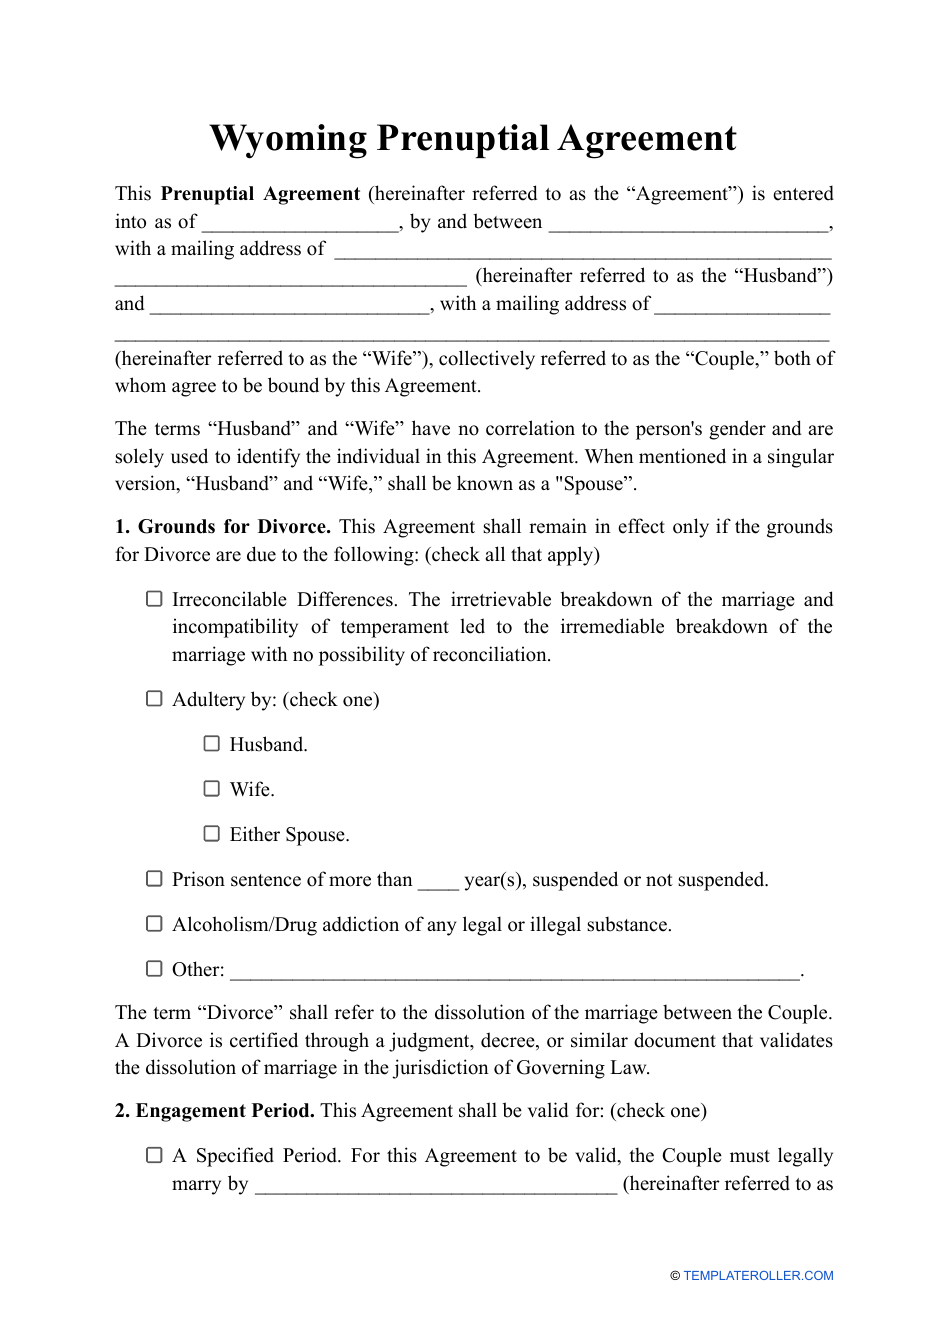 Prenuptial Agreement Template - Wyoming, Page 1